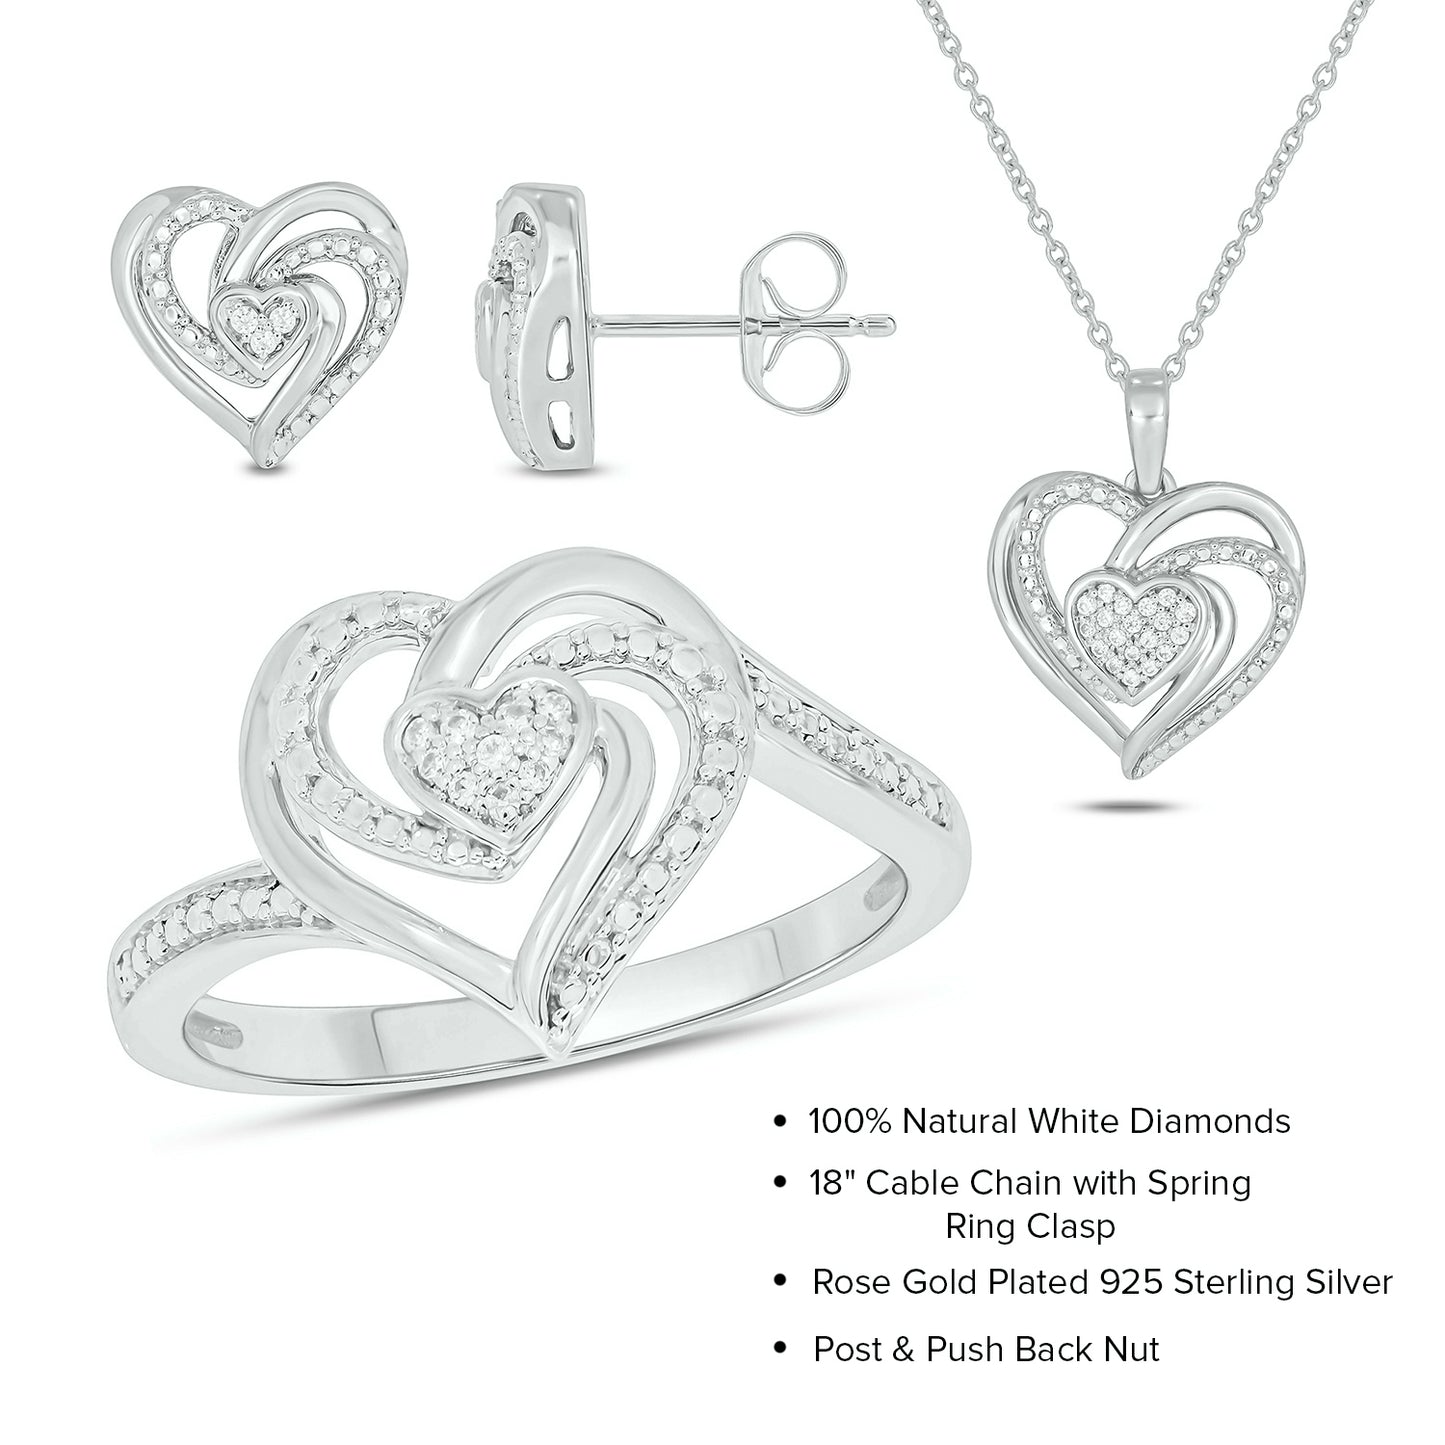 18K Gold Plated, Super Cute Heart Diamond Set in 925 Sterling Silver